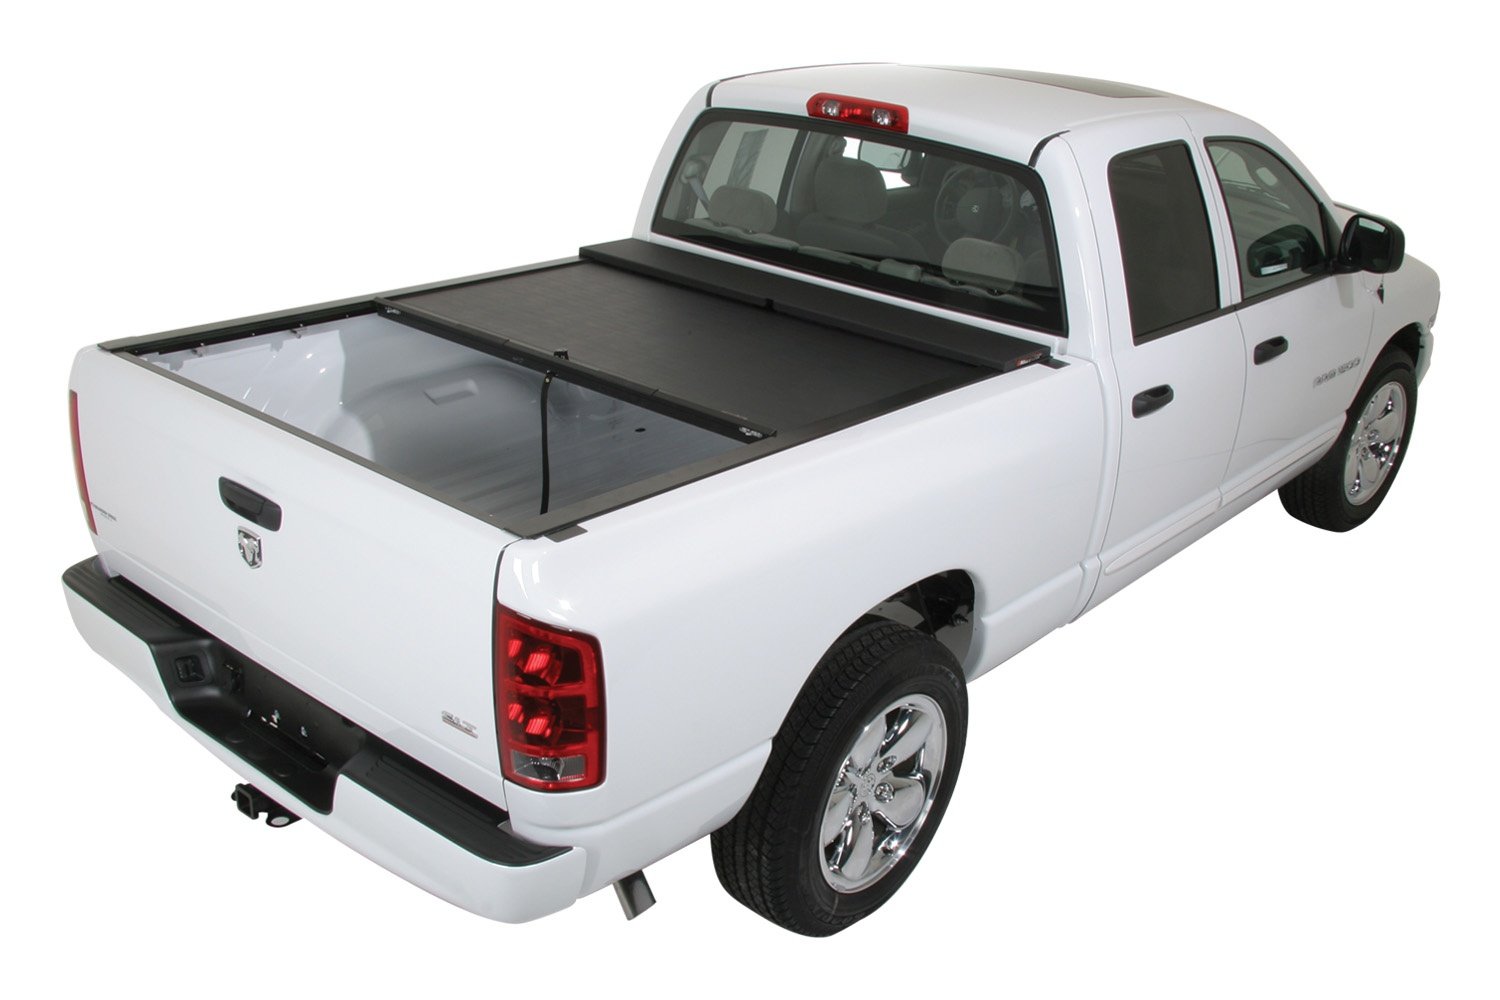 LG445M M-Series Locking Retractable Truck Bed Cover for 2002-2008 Dodge Ram 1500, 2003-2009 Ram 2500/3500 [6.4 ft. Bed]